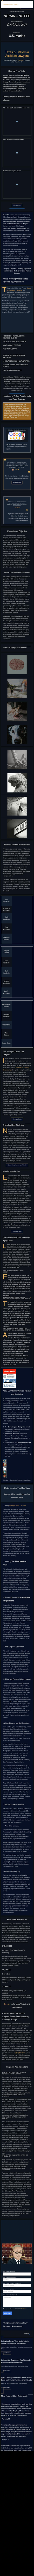 Ehline Law Firm Personal Injury Attorneys, APLC - Torrance CA Lawyers